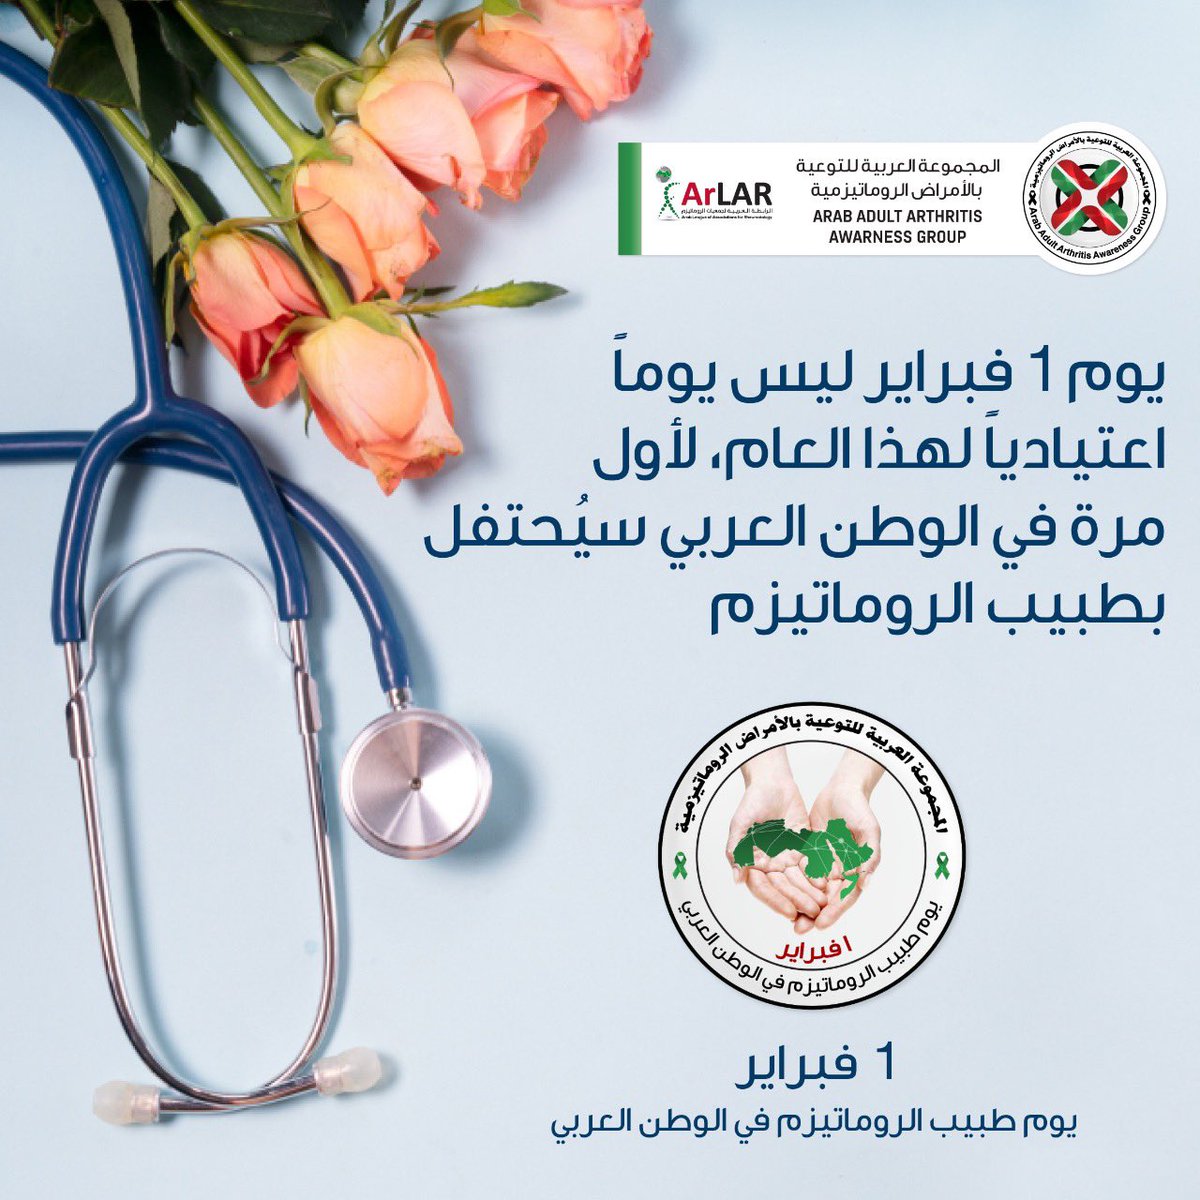 Initiative from @groupaaaa 
For the first time in #Arabregion
First of February will be Rheumatologist Day starting 2021 under umbrella of @ArLARheumatolog 
 #rheumaticdiseases #rheumatology #rheumatologist #AAAAgroup
#Arabrheumaticdiseasesawarenessmonth #ARAM #rheumatologistday